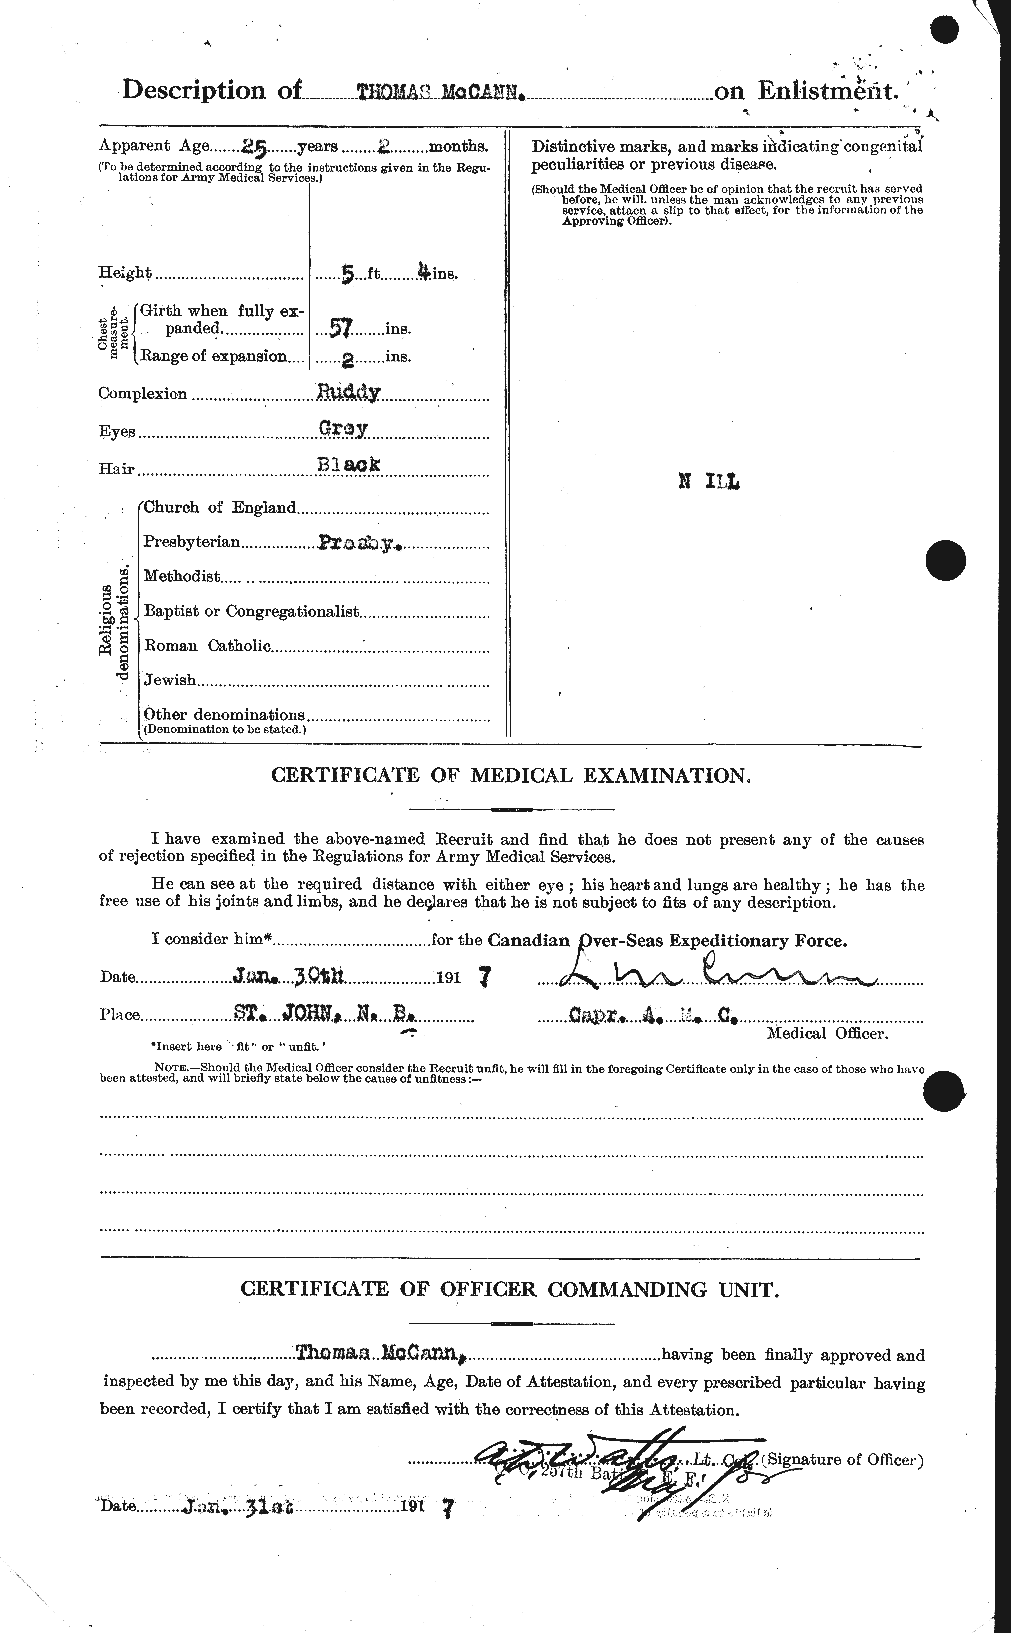 Personnel Records of the First World War - CEF 132671b